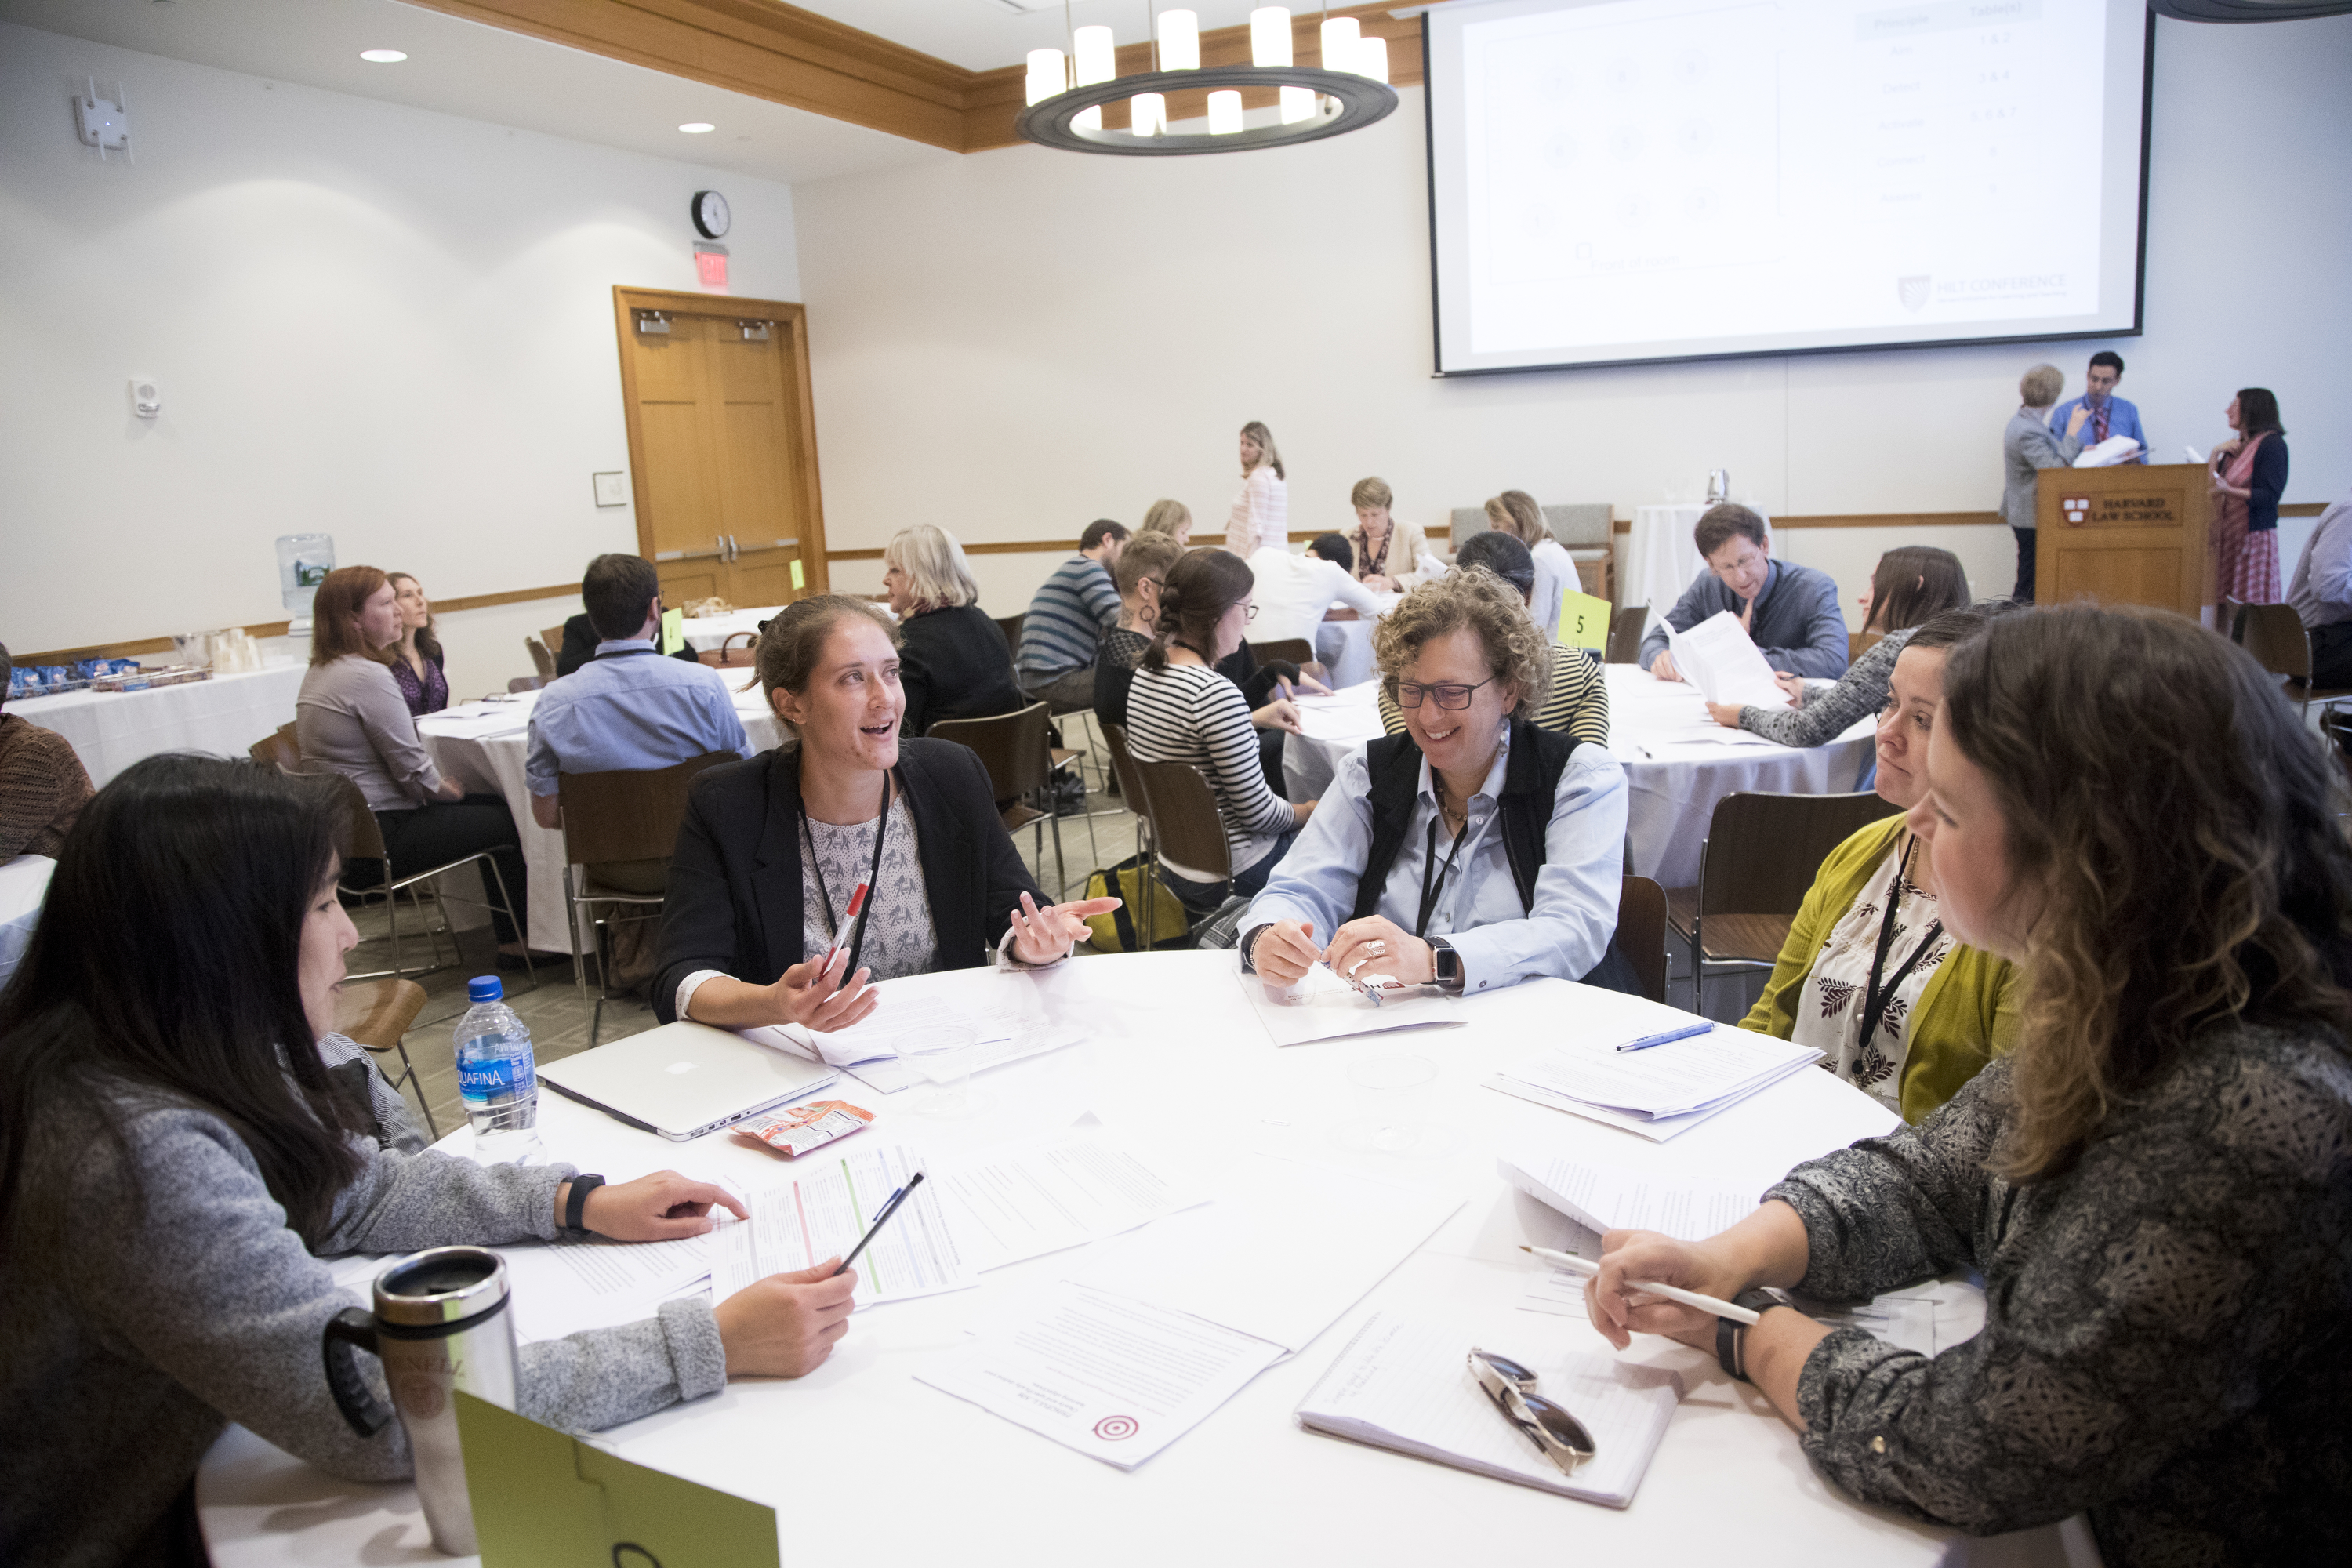 Attendees have small group discussion during "Simple Ways to Use the Science of Learning" breakout session